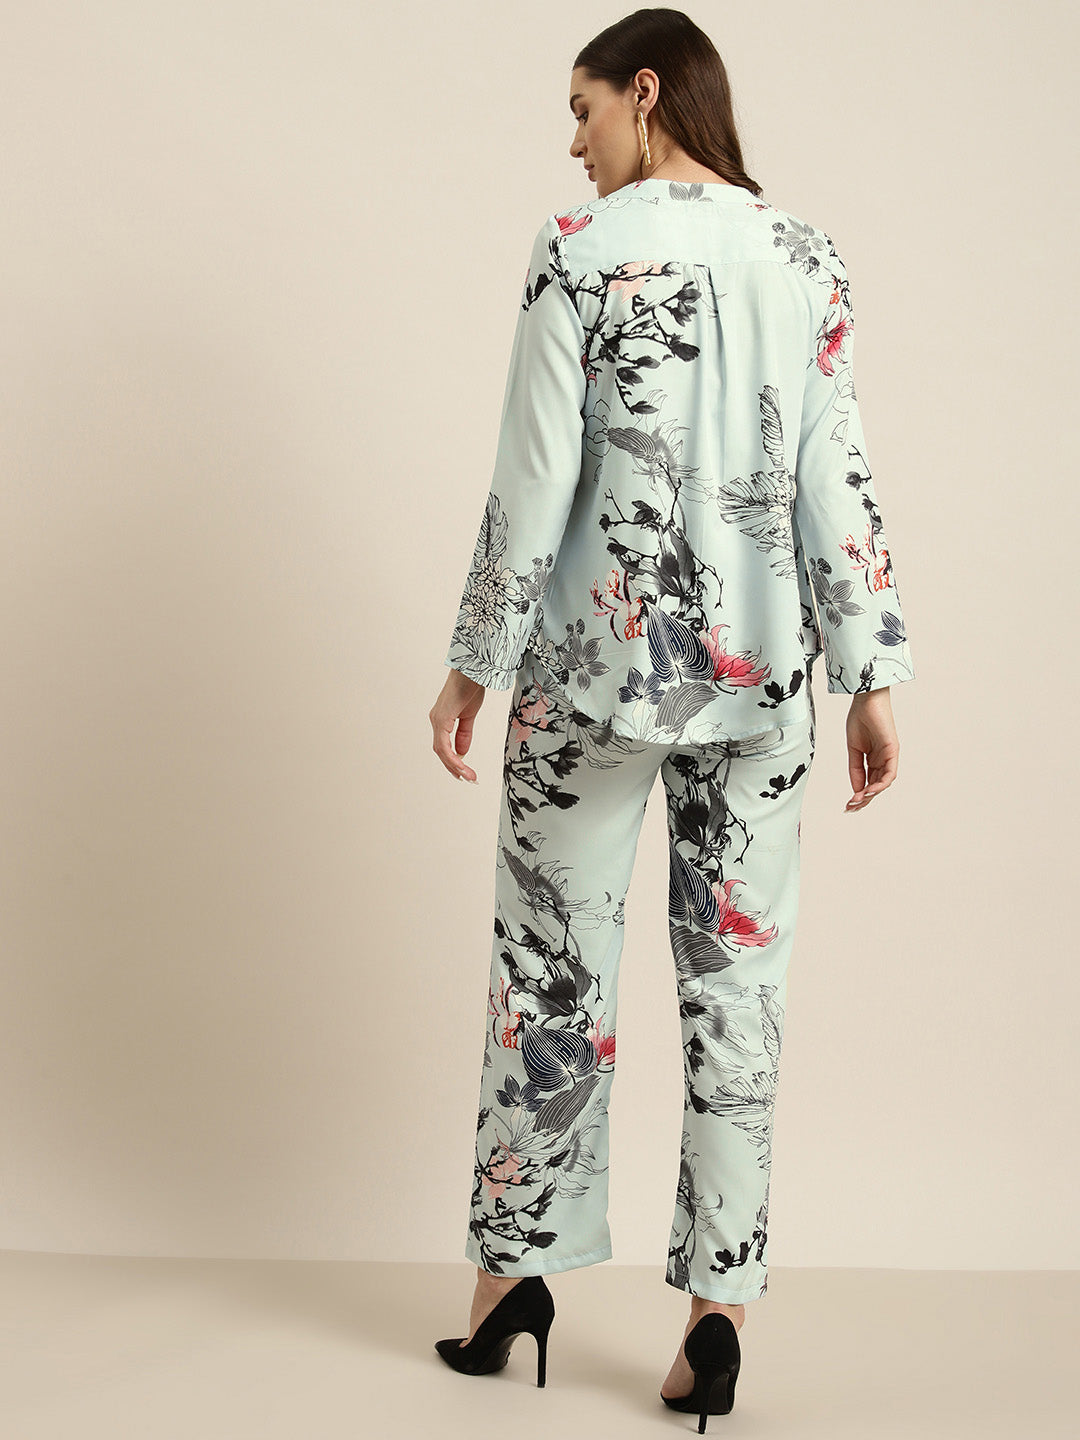 Turquoise blue camouflage print crepe shirt and pant set